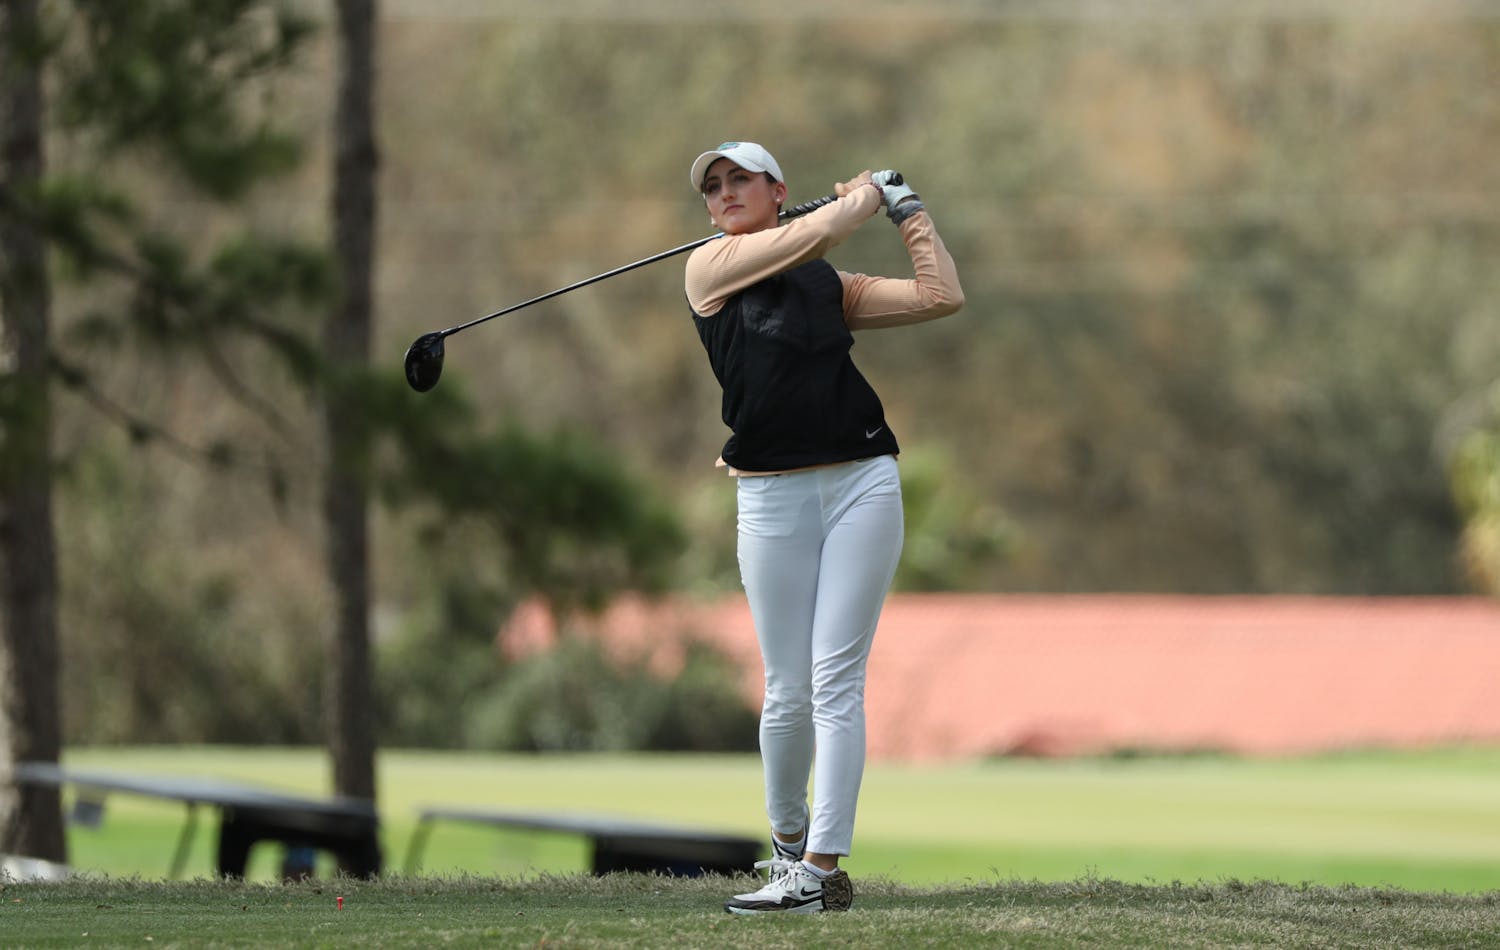 UF golfer Maisie Filler on Monday, February 22, 2021 at the Mark Bostick Golf Course in Gainesville, FL / UAA Communications photo by Isabella Marley.